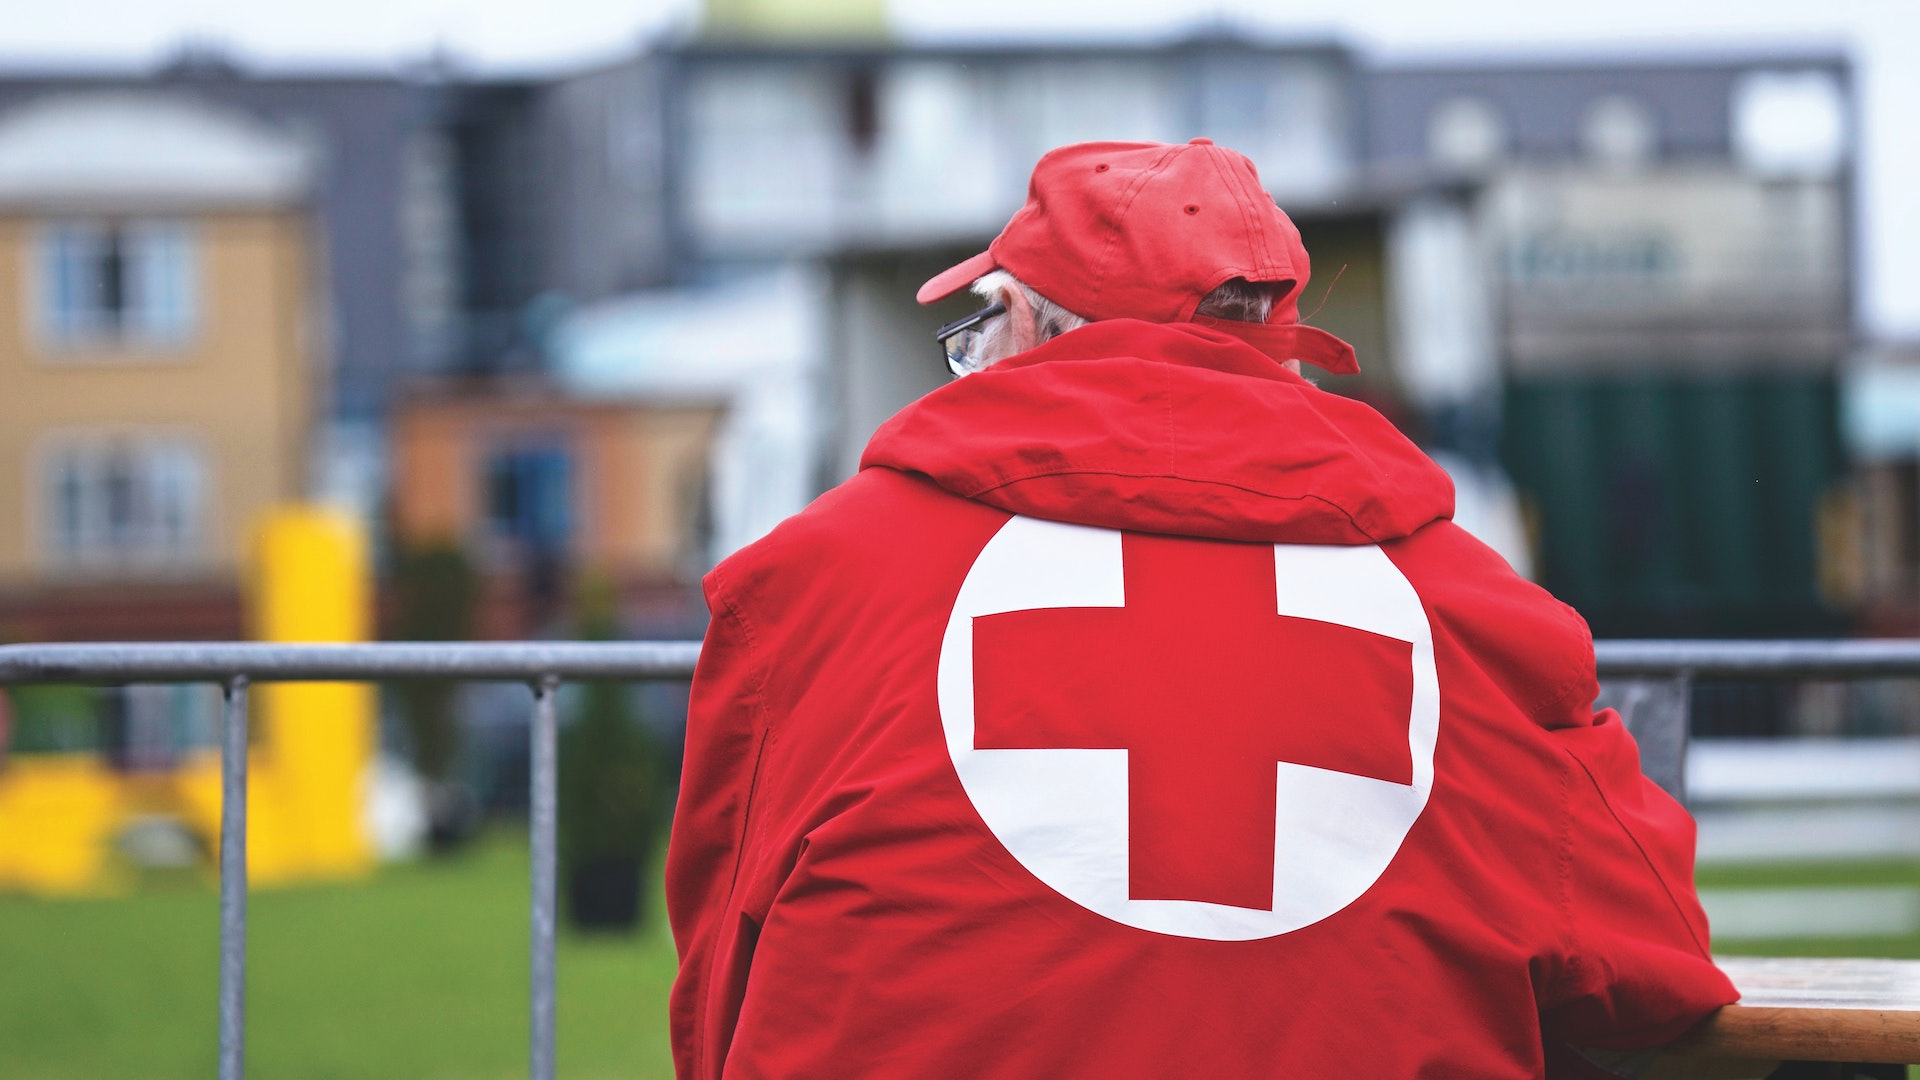 A man in a red cross jackert leans on a railing